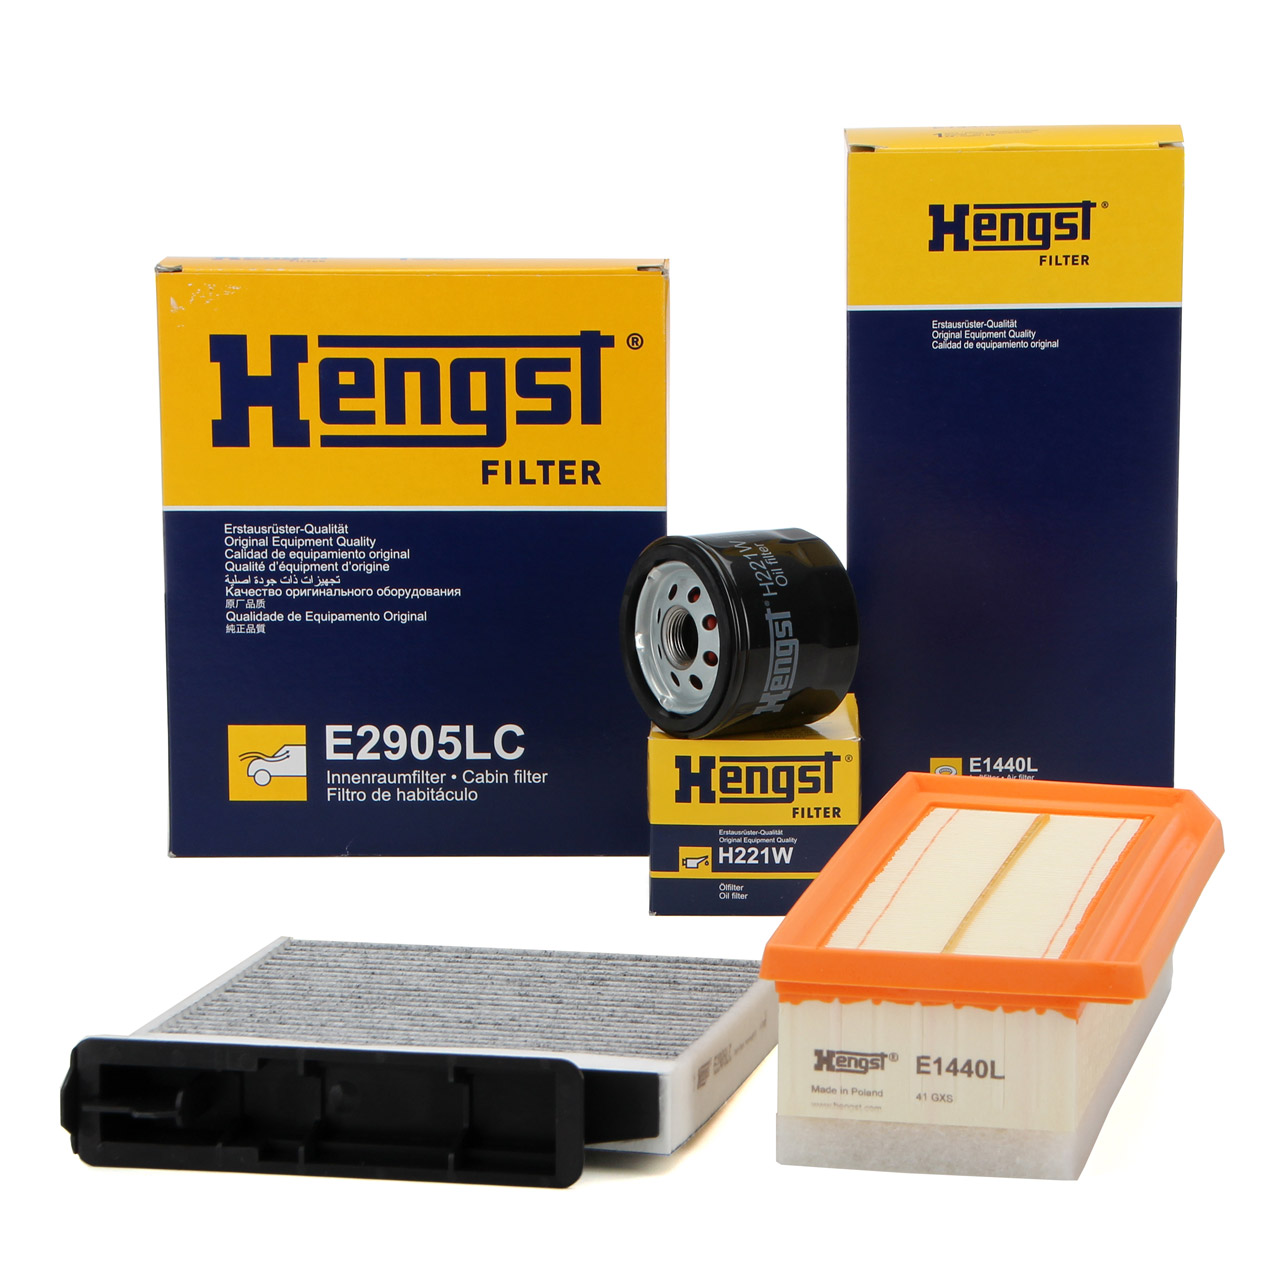 HENGST Filter-Set DACIA Duster (HS_) 1.5 dCi / 4x4 86-110 PS mit VALEO-System